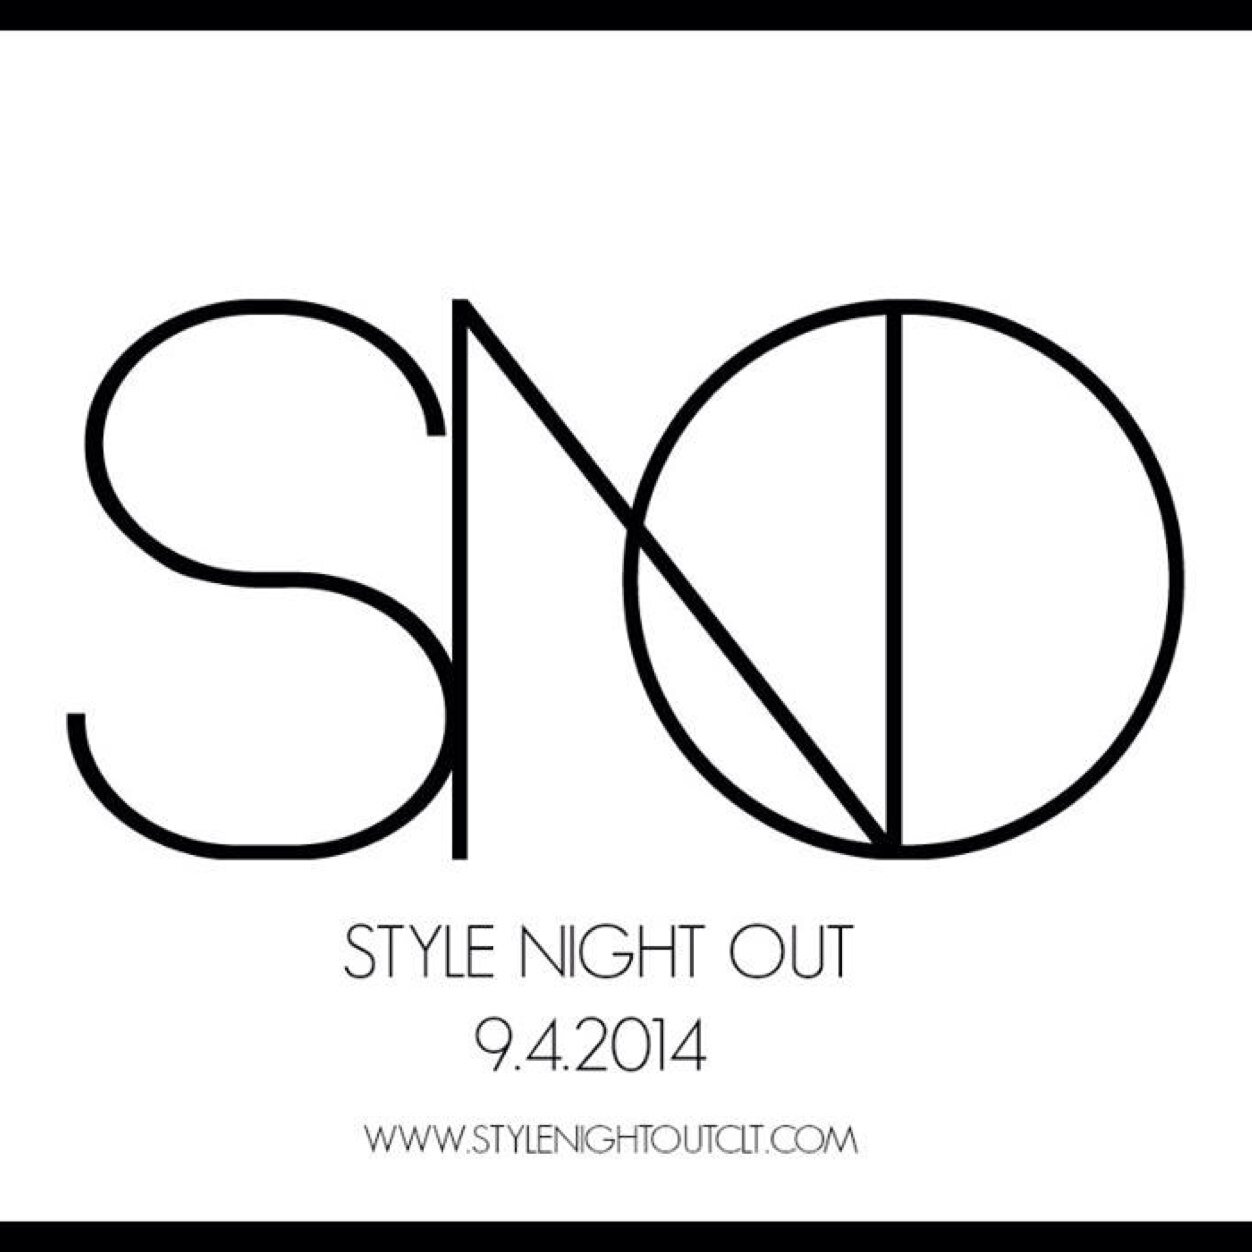 The Most Stylish Night is Back! On 9.4.14, over 30 local boutiques, salons & makeup artists will come together to show off their style on the runway.